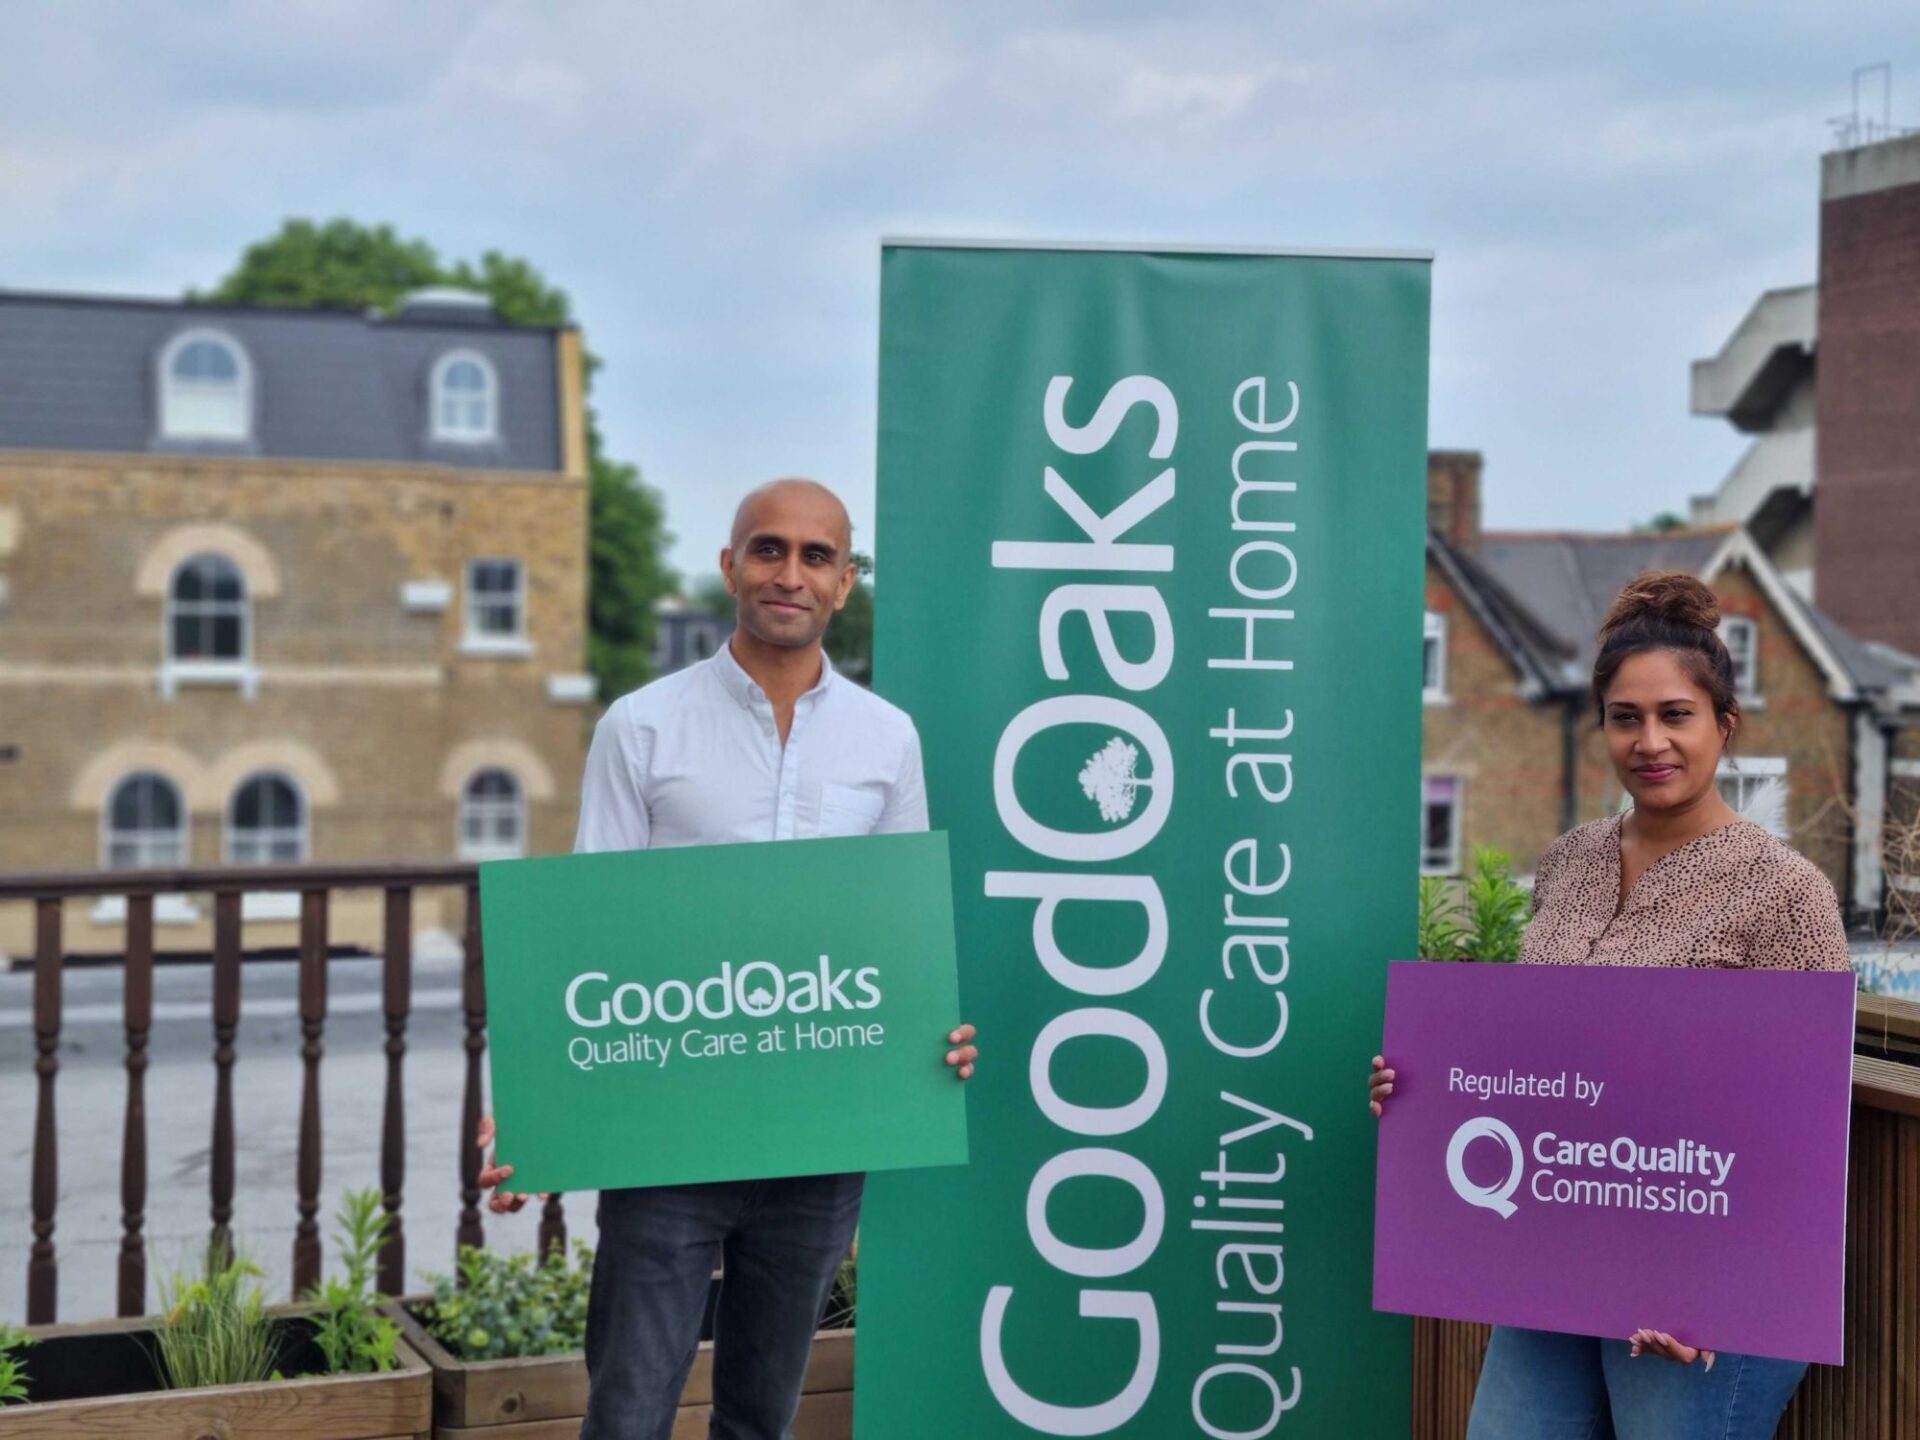 Good Oaks Home Care in Wimbledon and Kingston receives glowing report from Care Quality Commission